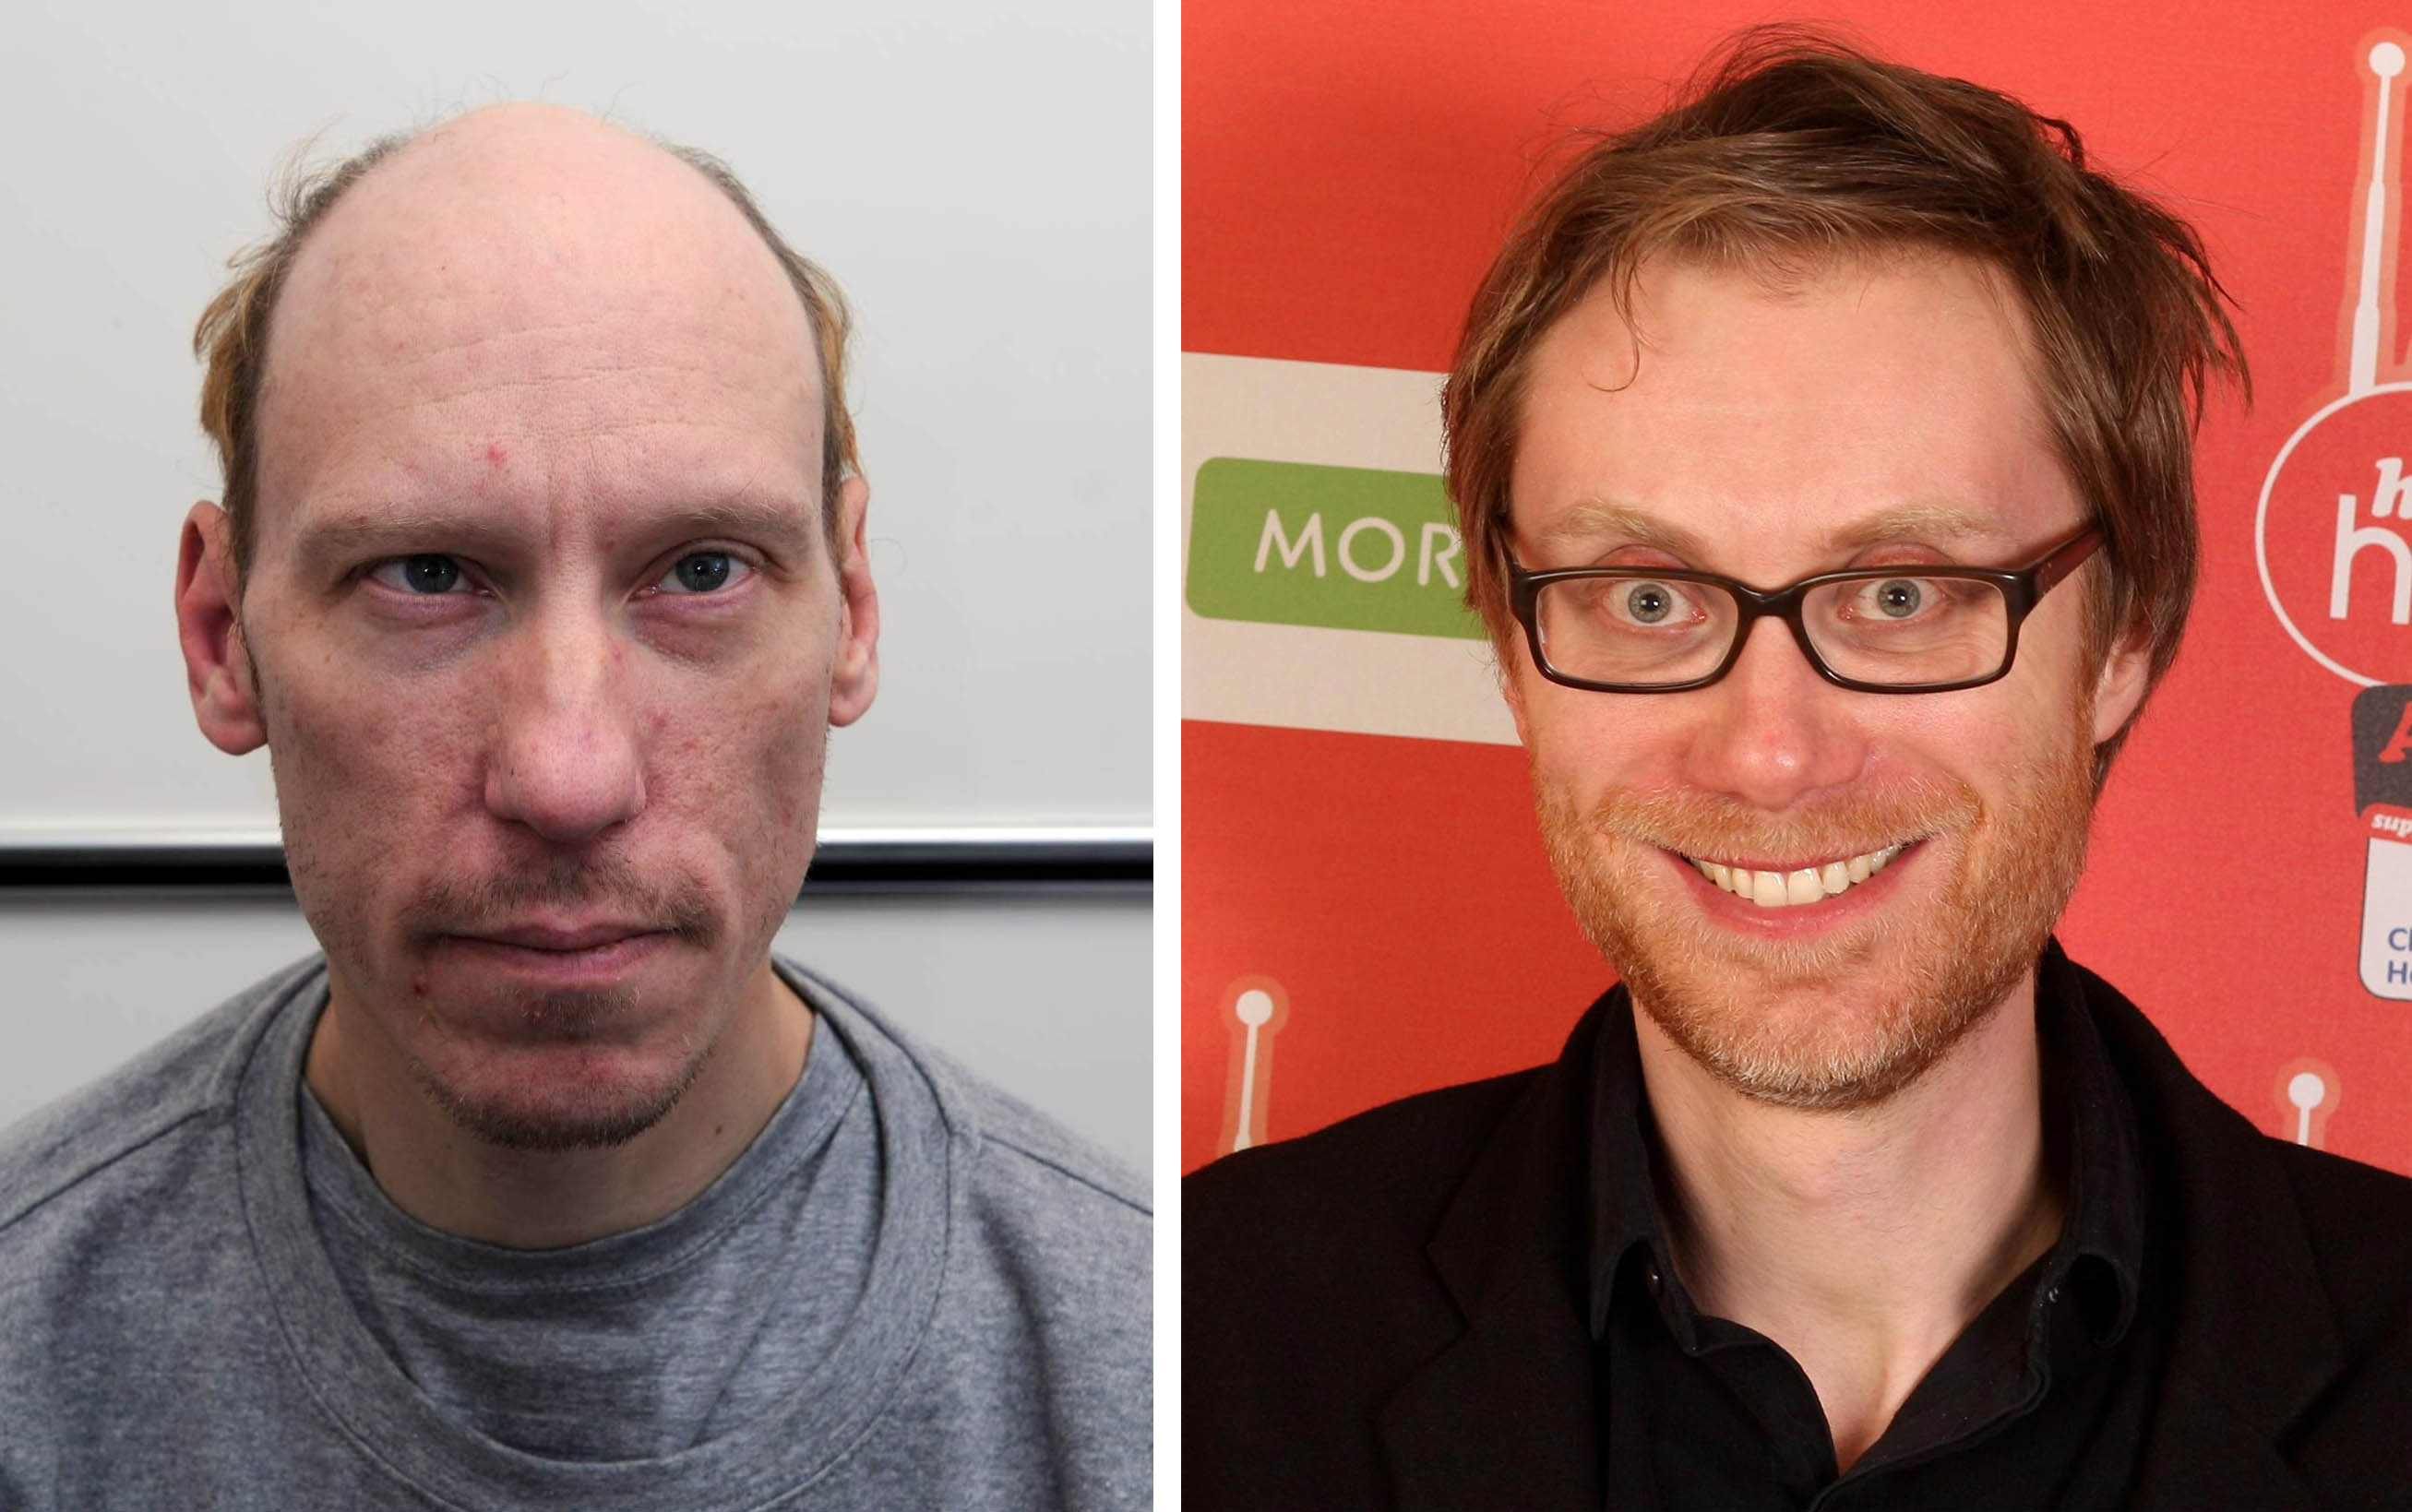 Stephen Port (left) and Stephen Merchant - The Barking Murders will be told from the point of the view of the families of the victims, focusing on their fight to uncover the truth about what happened to their sons and brothers. 
(Metropolitan Police/Dominic Lipinski/PA Wire)